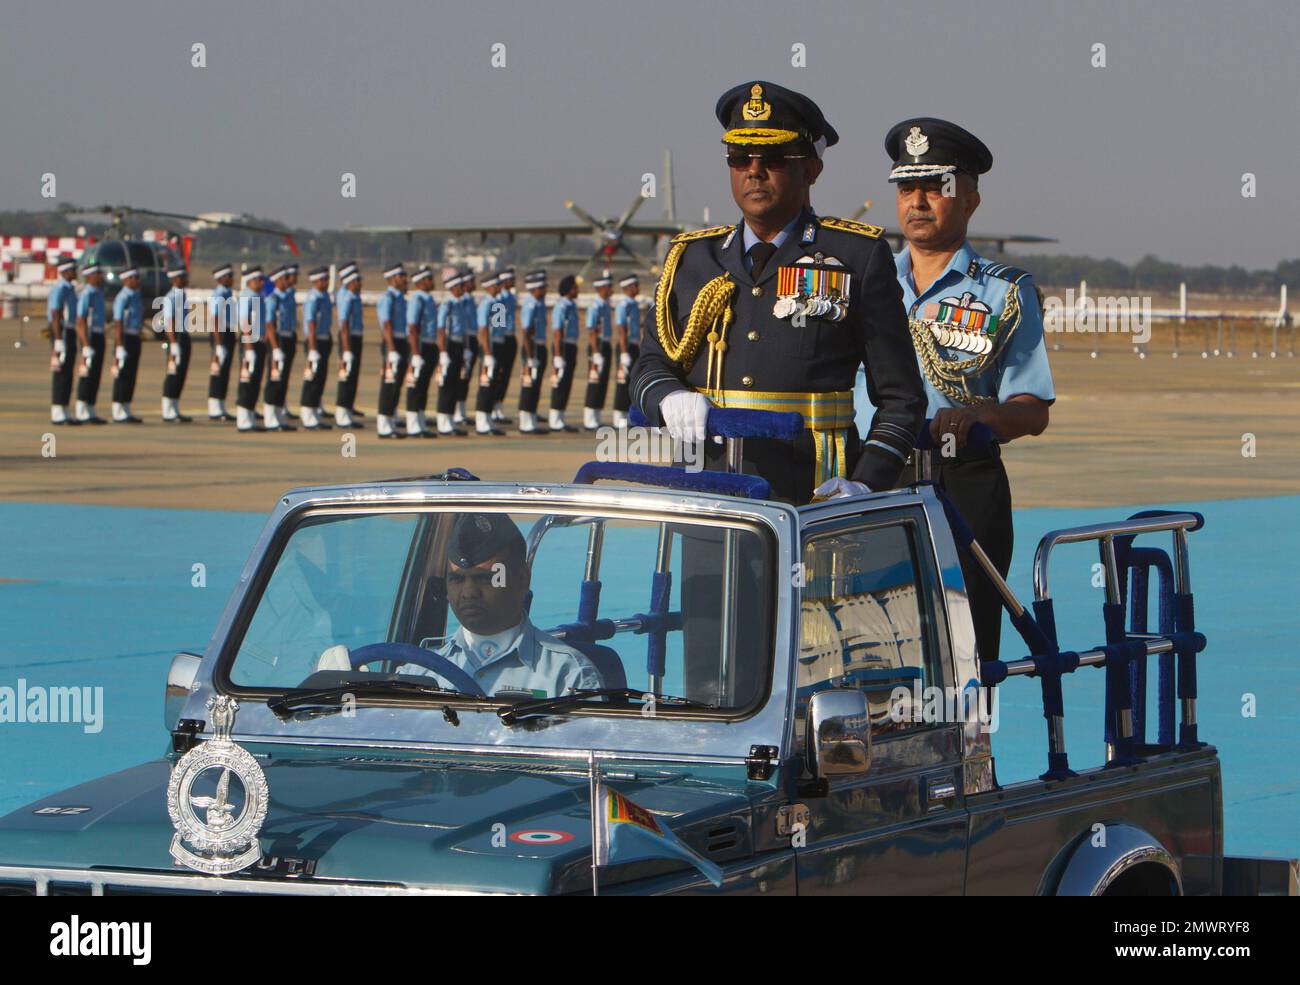 Air Marshal KVB Jayampathy, Commander, Sri Lanka Air Force, reviews the  graduation parade at the Indian Air Force academy in Dundigal, outskirts of  Hyderabad, India, Saturday, Dec. 17, 2016. A total of